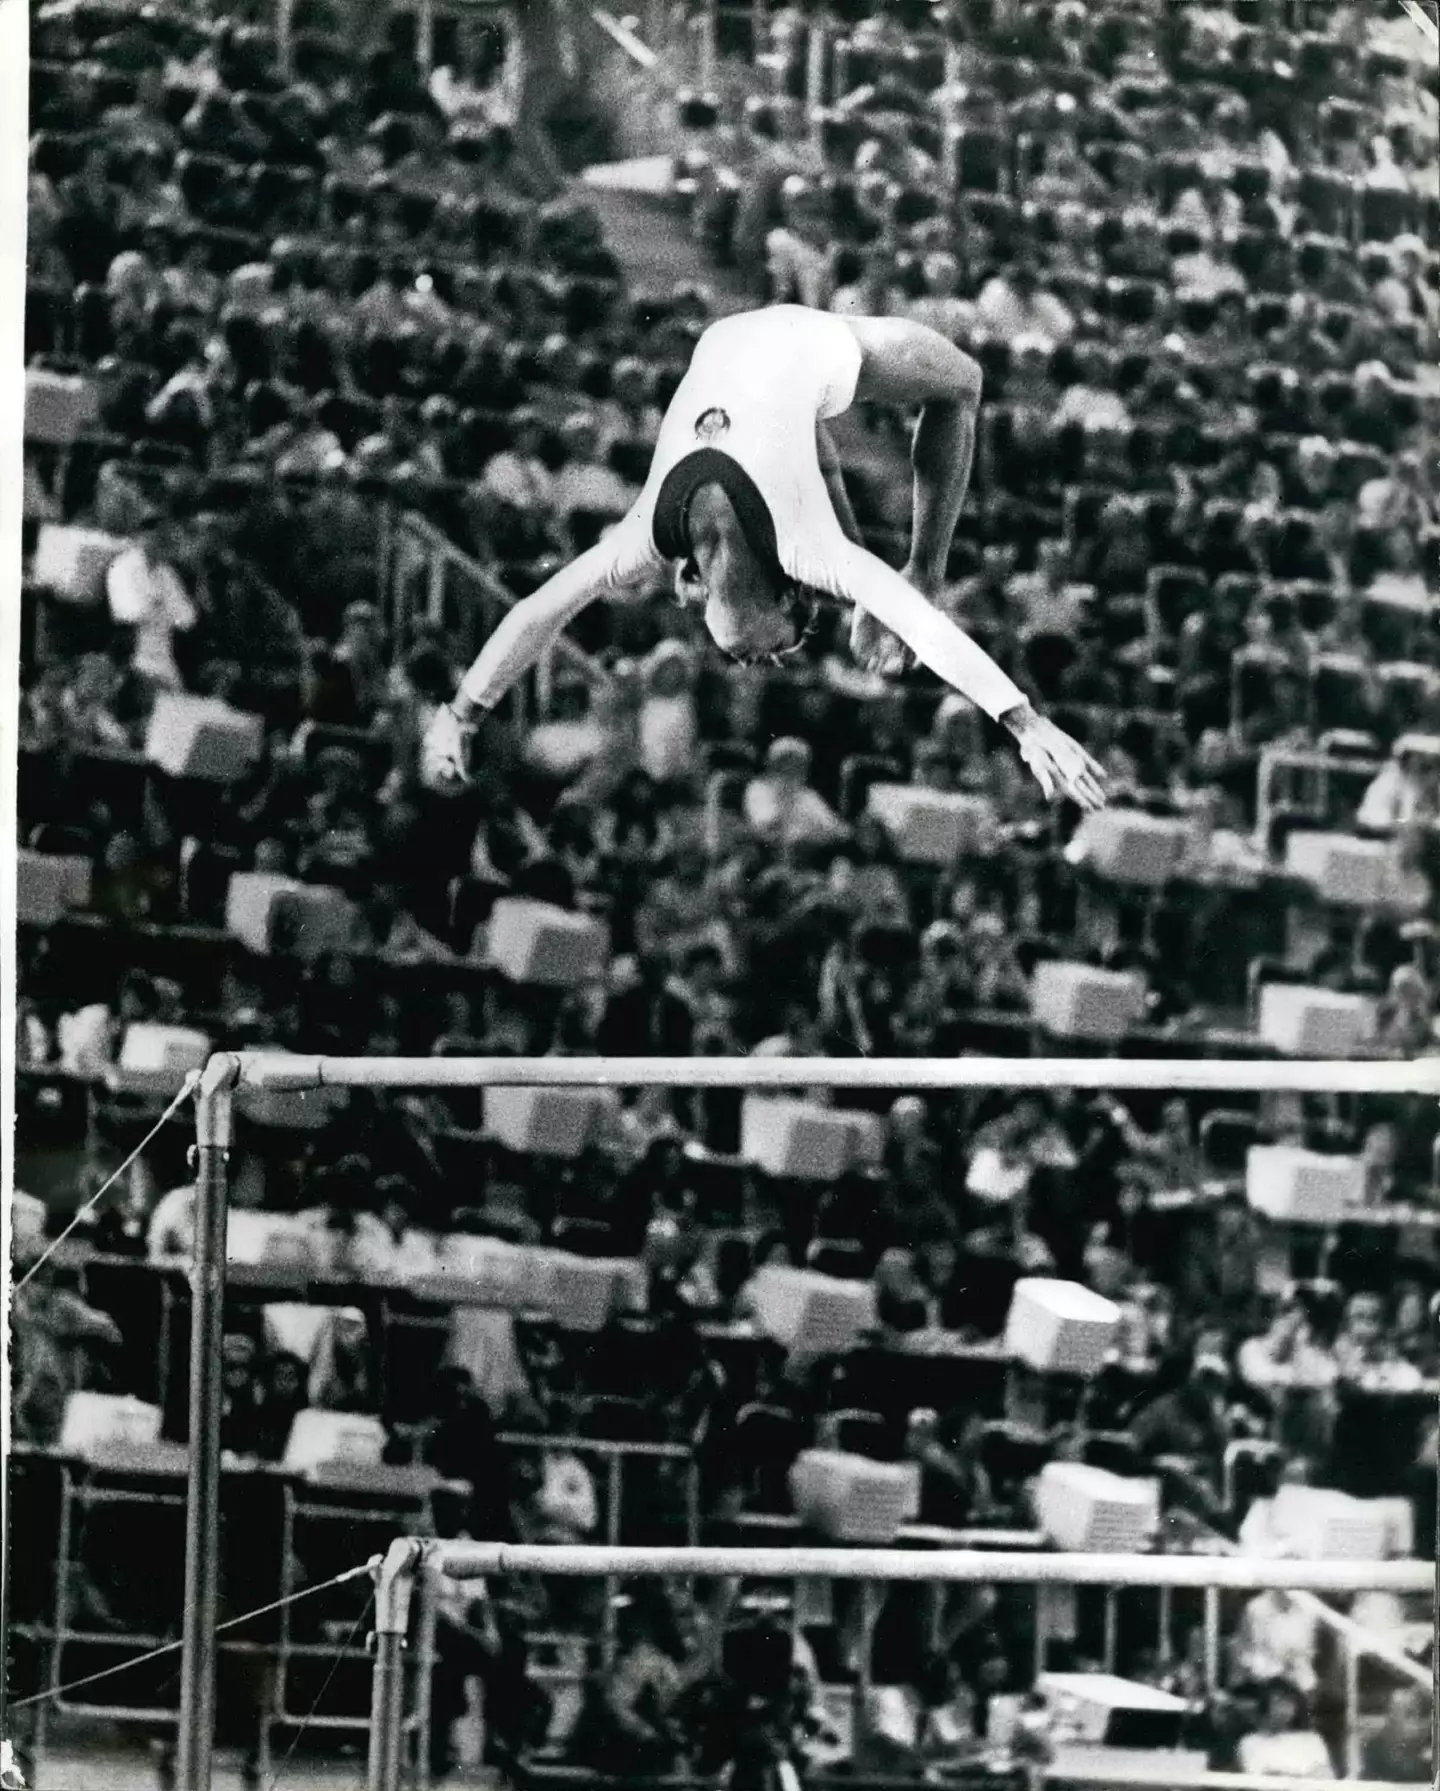 Olga Korbut performing the now banned 'dead loop', which involves doing a backflip off the top bar and grabbing onto it.